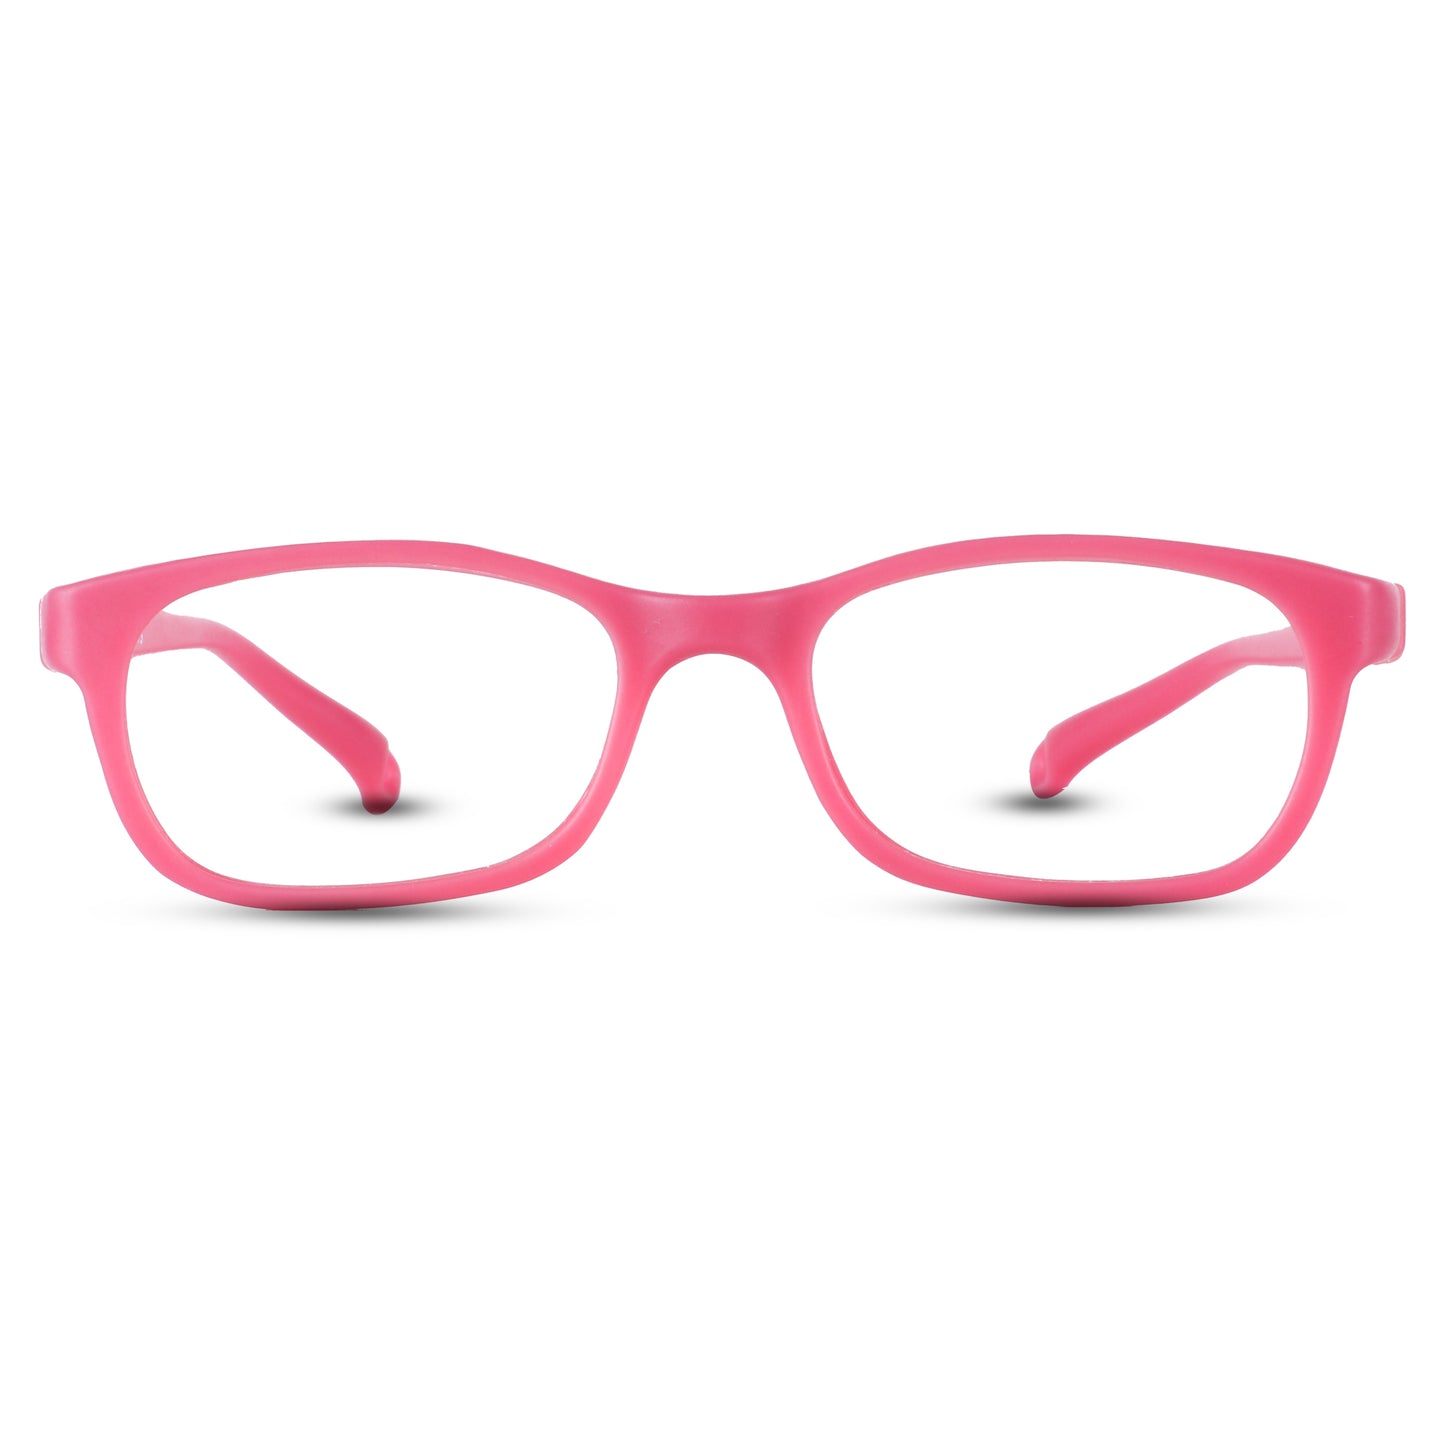 Sirts Pink Square Flexible With Silicon Band TR869